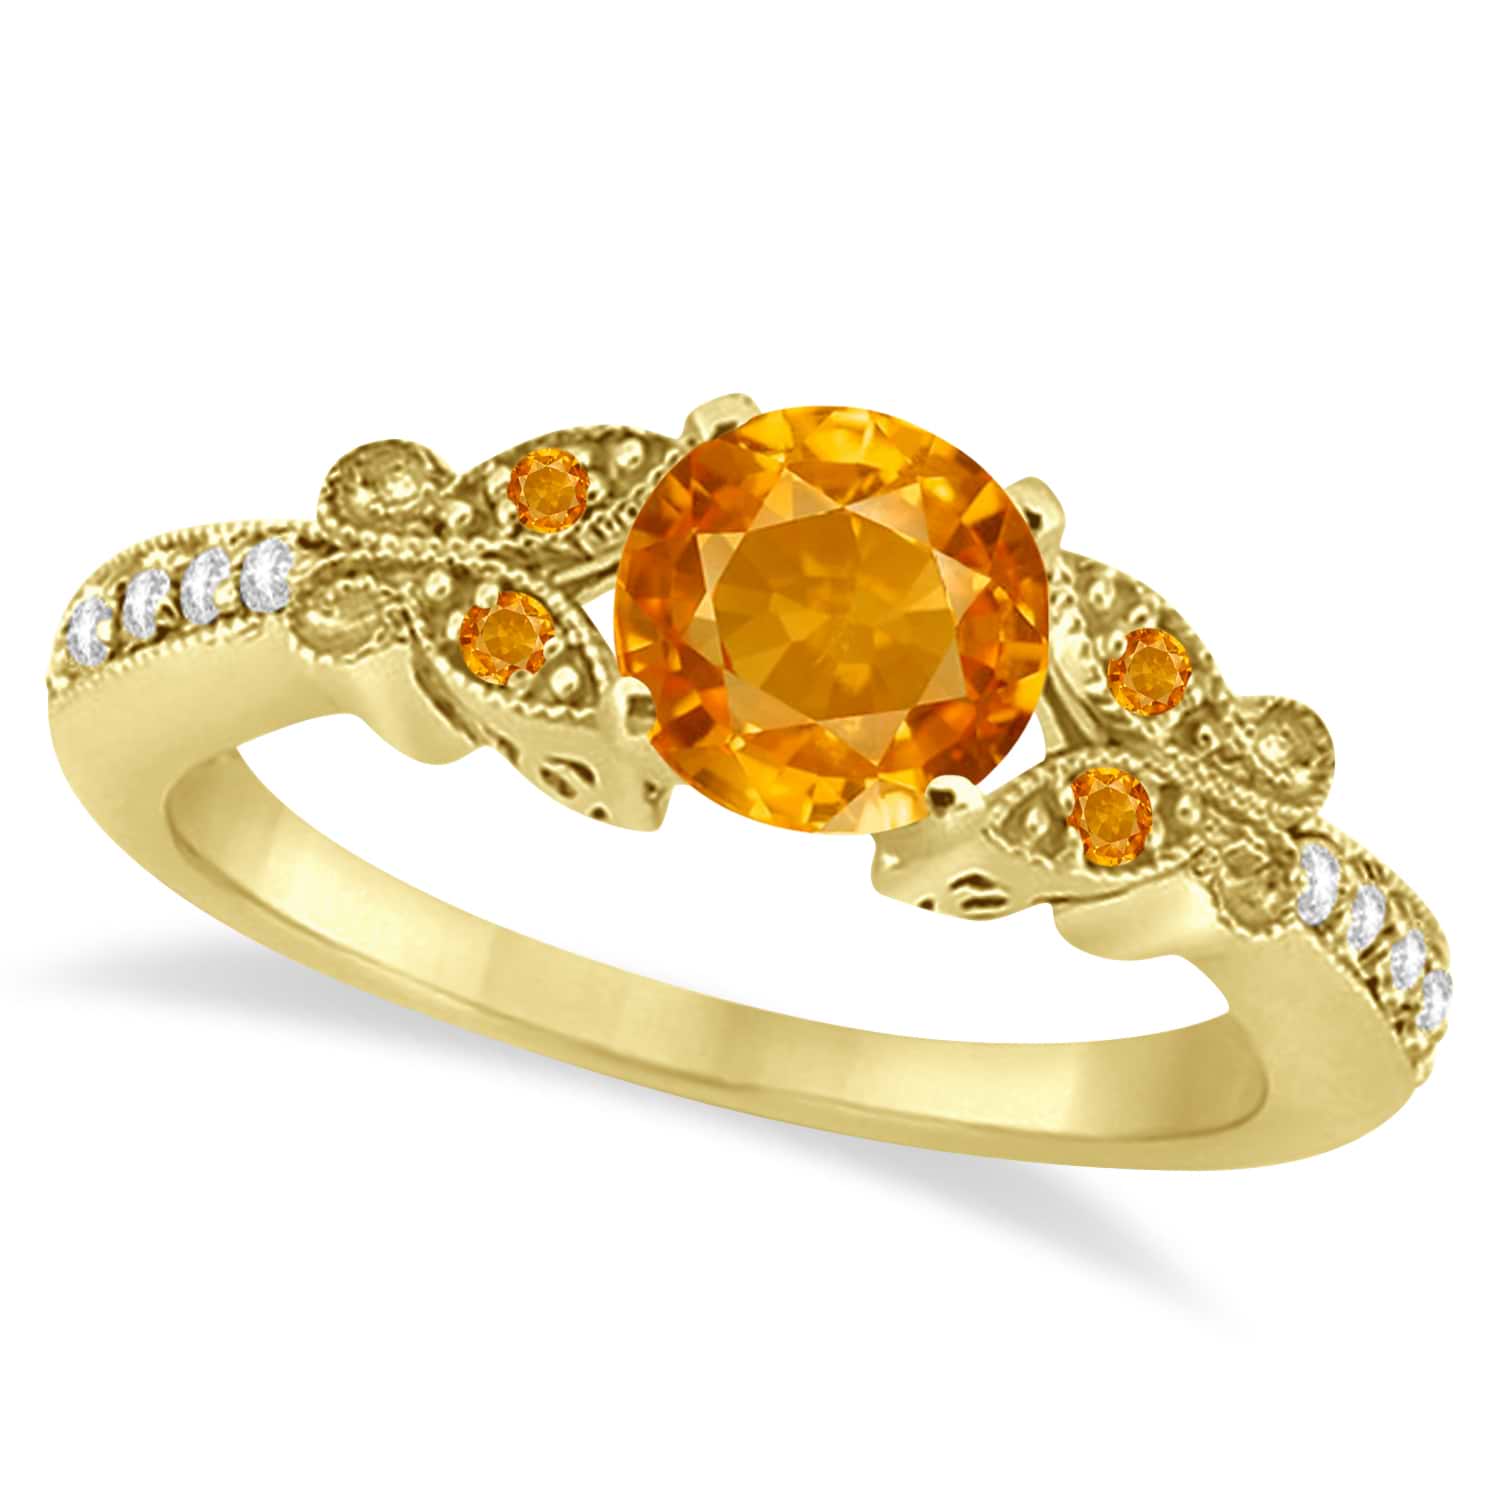 Butterfly Genuine Citrine & Diamond Engagement Ring 14k Yellow Gold (1.53ct)